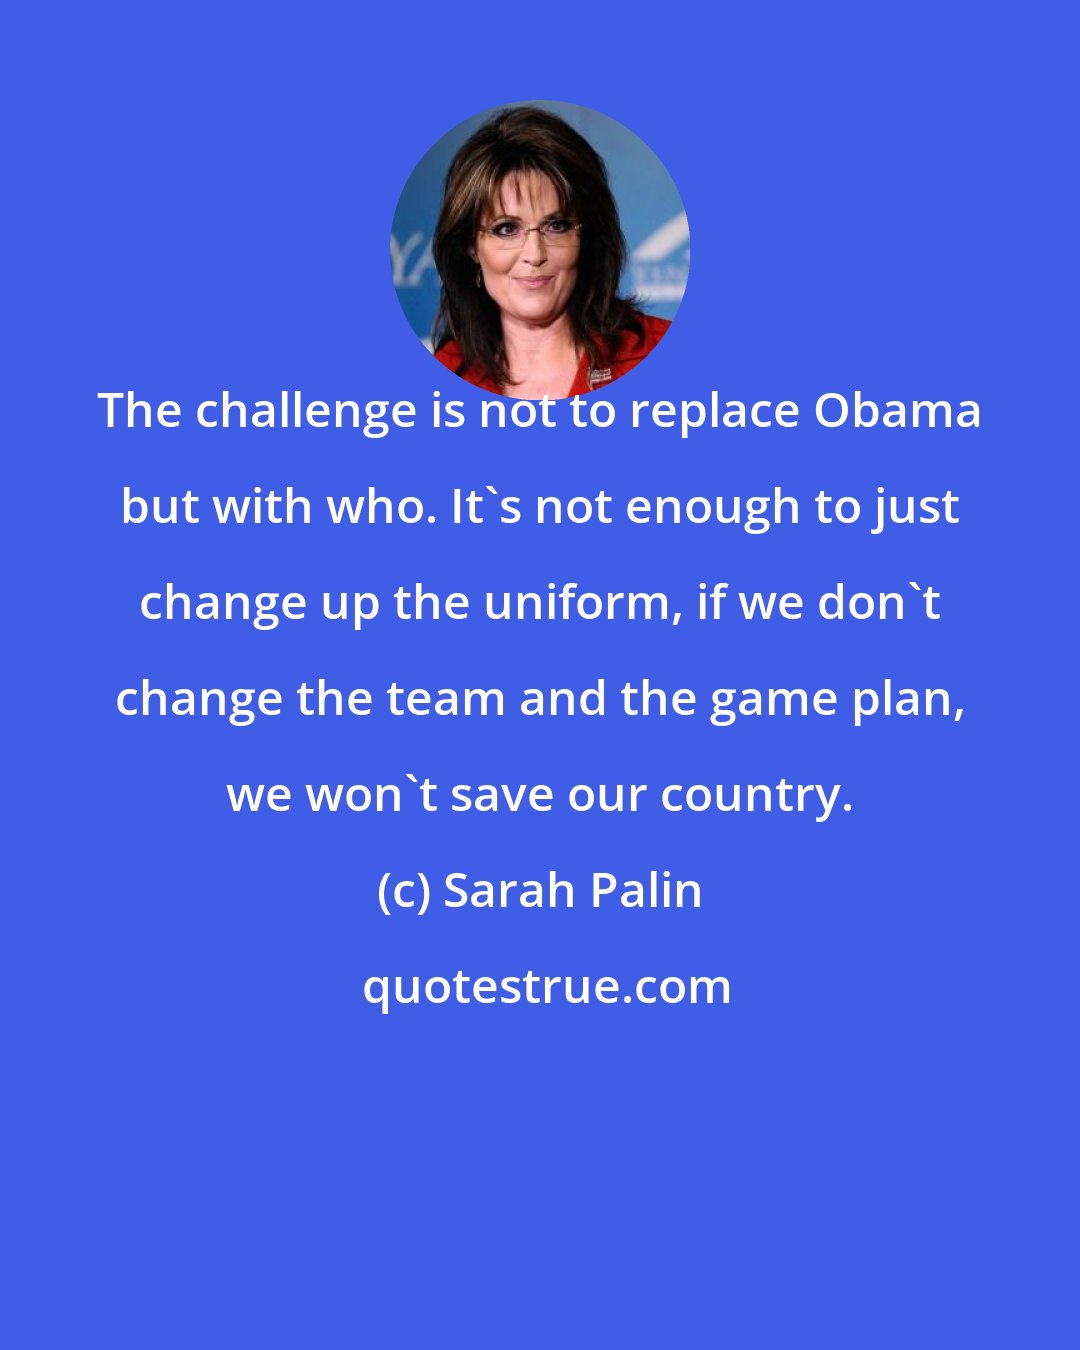 Sarah Palin: The challenge is not to replace Obama but with who. It's not enough to just change up the uniform, if we don't change the team and the game plan, we won't save our country.